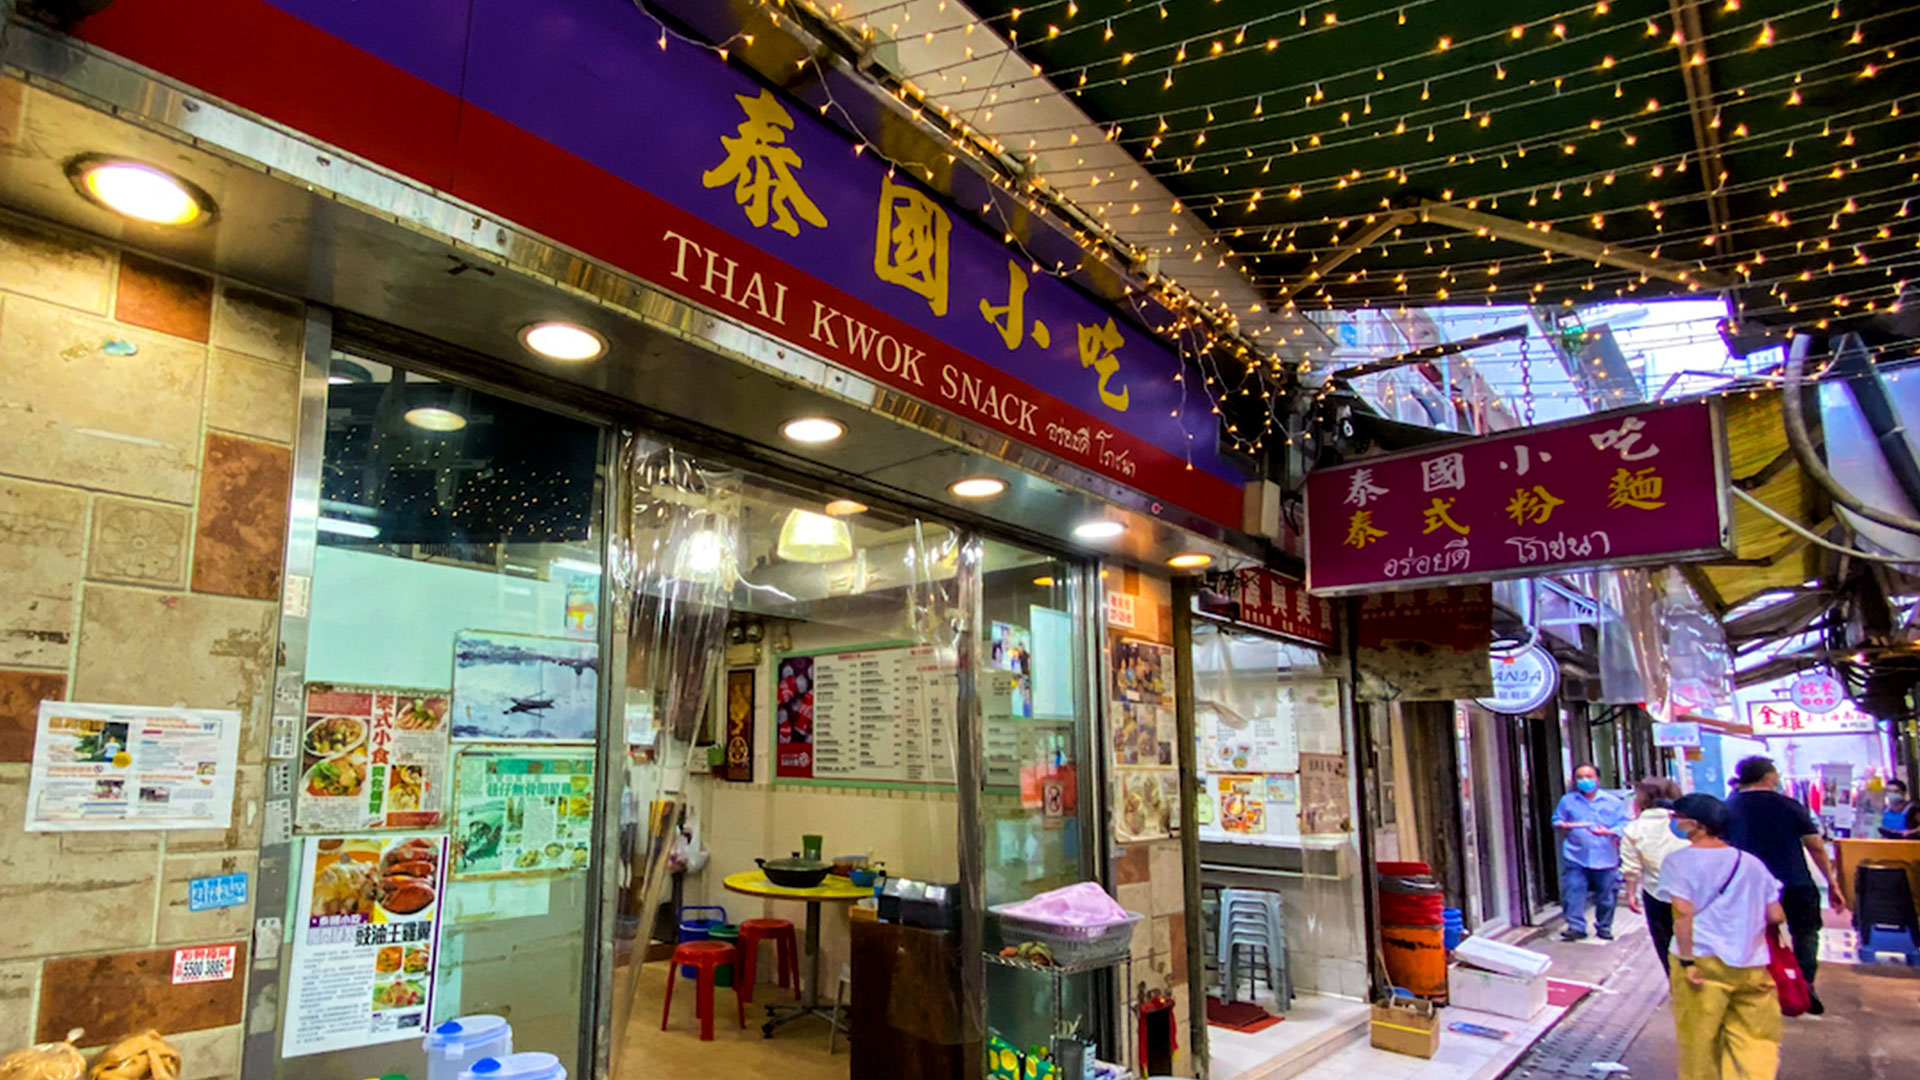 10 Great Dishes to Try in Hong Kong - What to Eat in Hong Kong - Go Guides